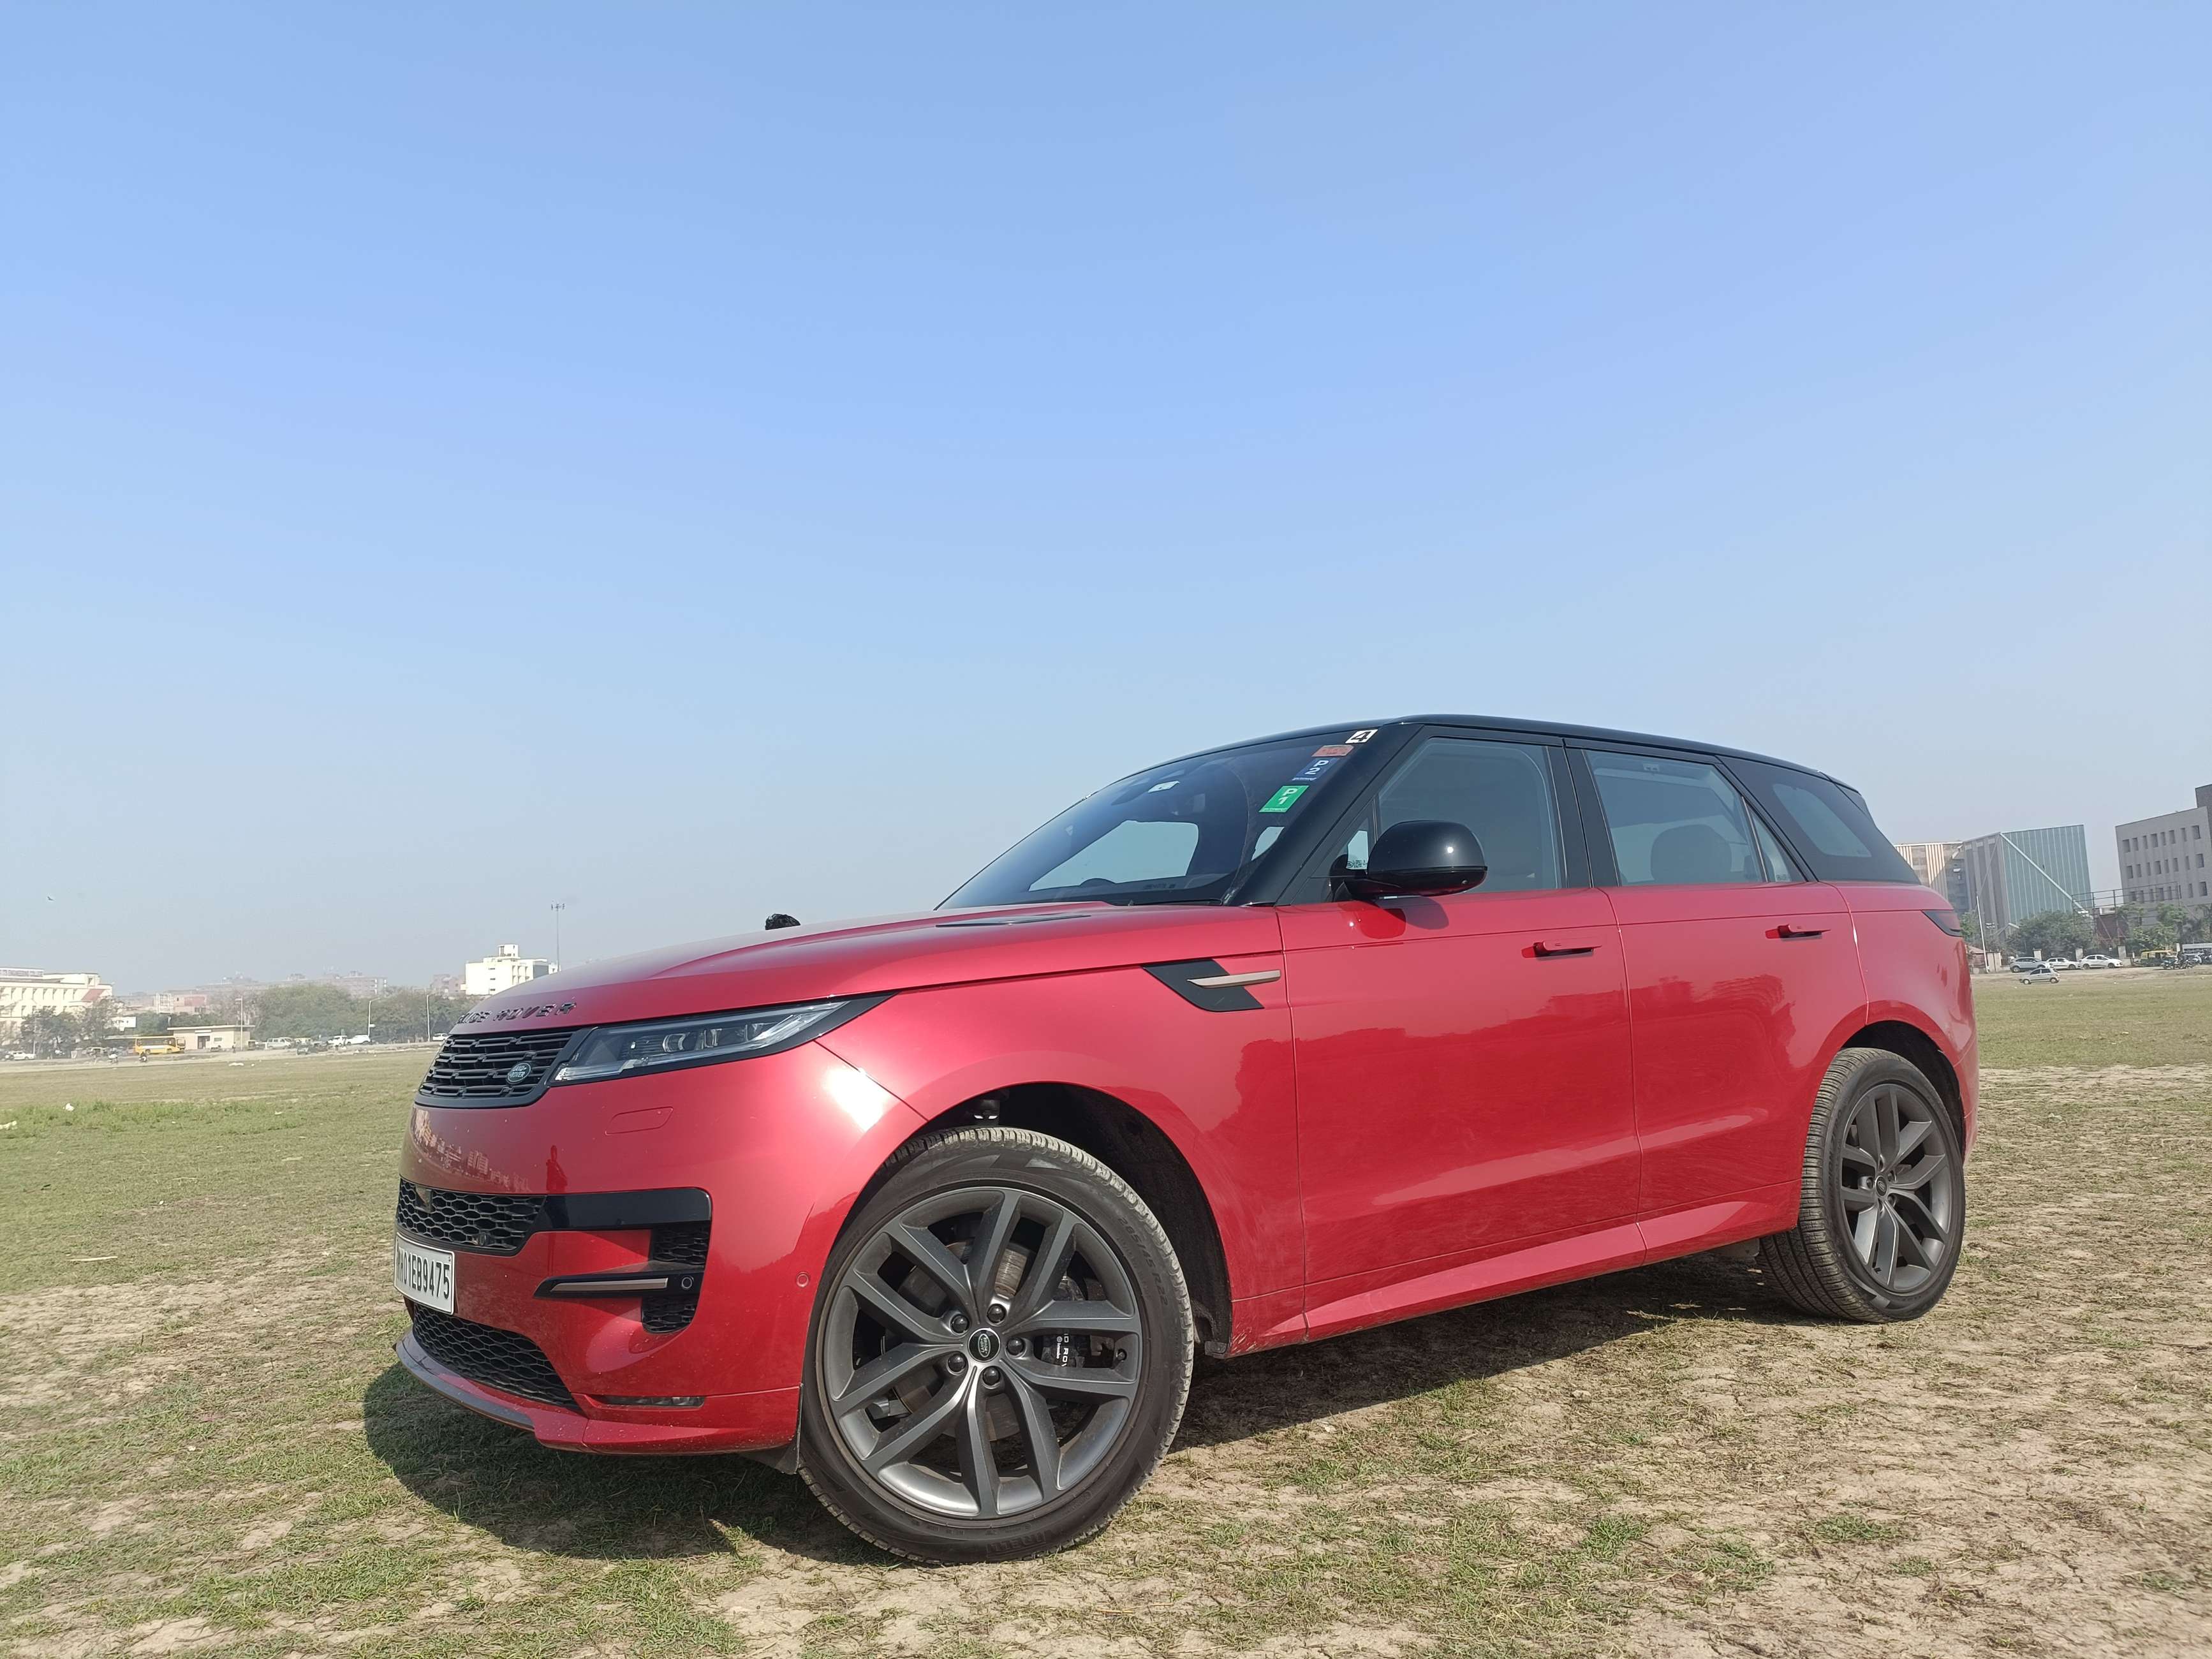 Range Rover And Range Rover Sport Prices Compared With Mercedes-Maybach And BMW